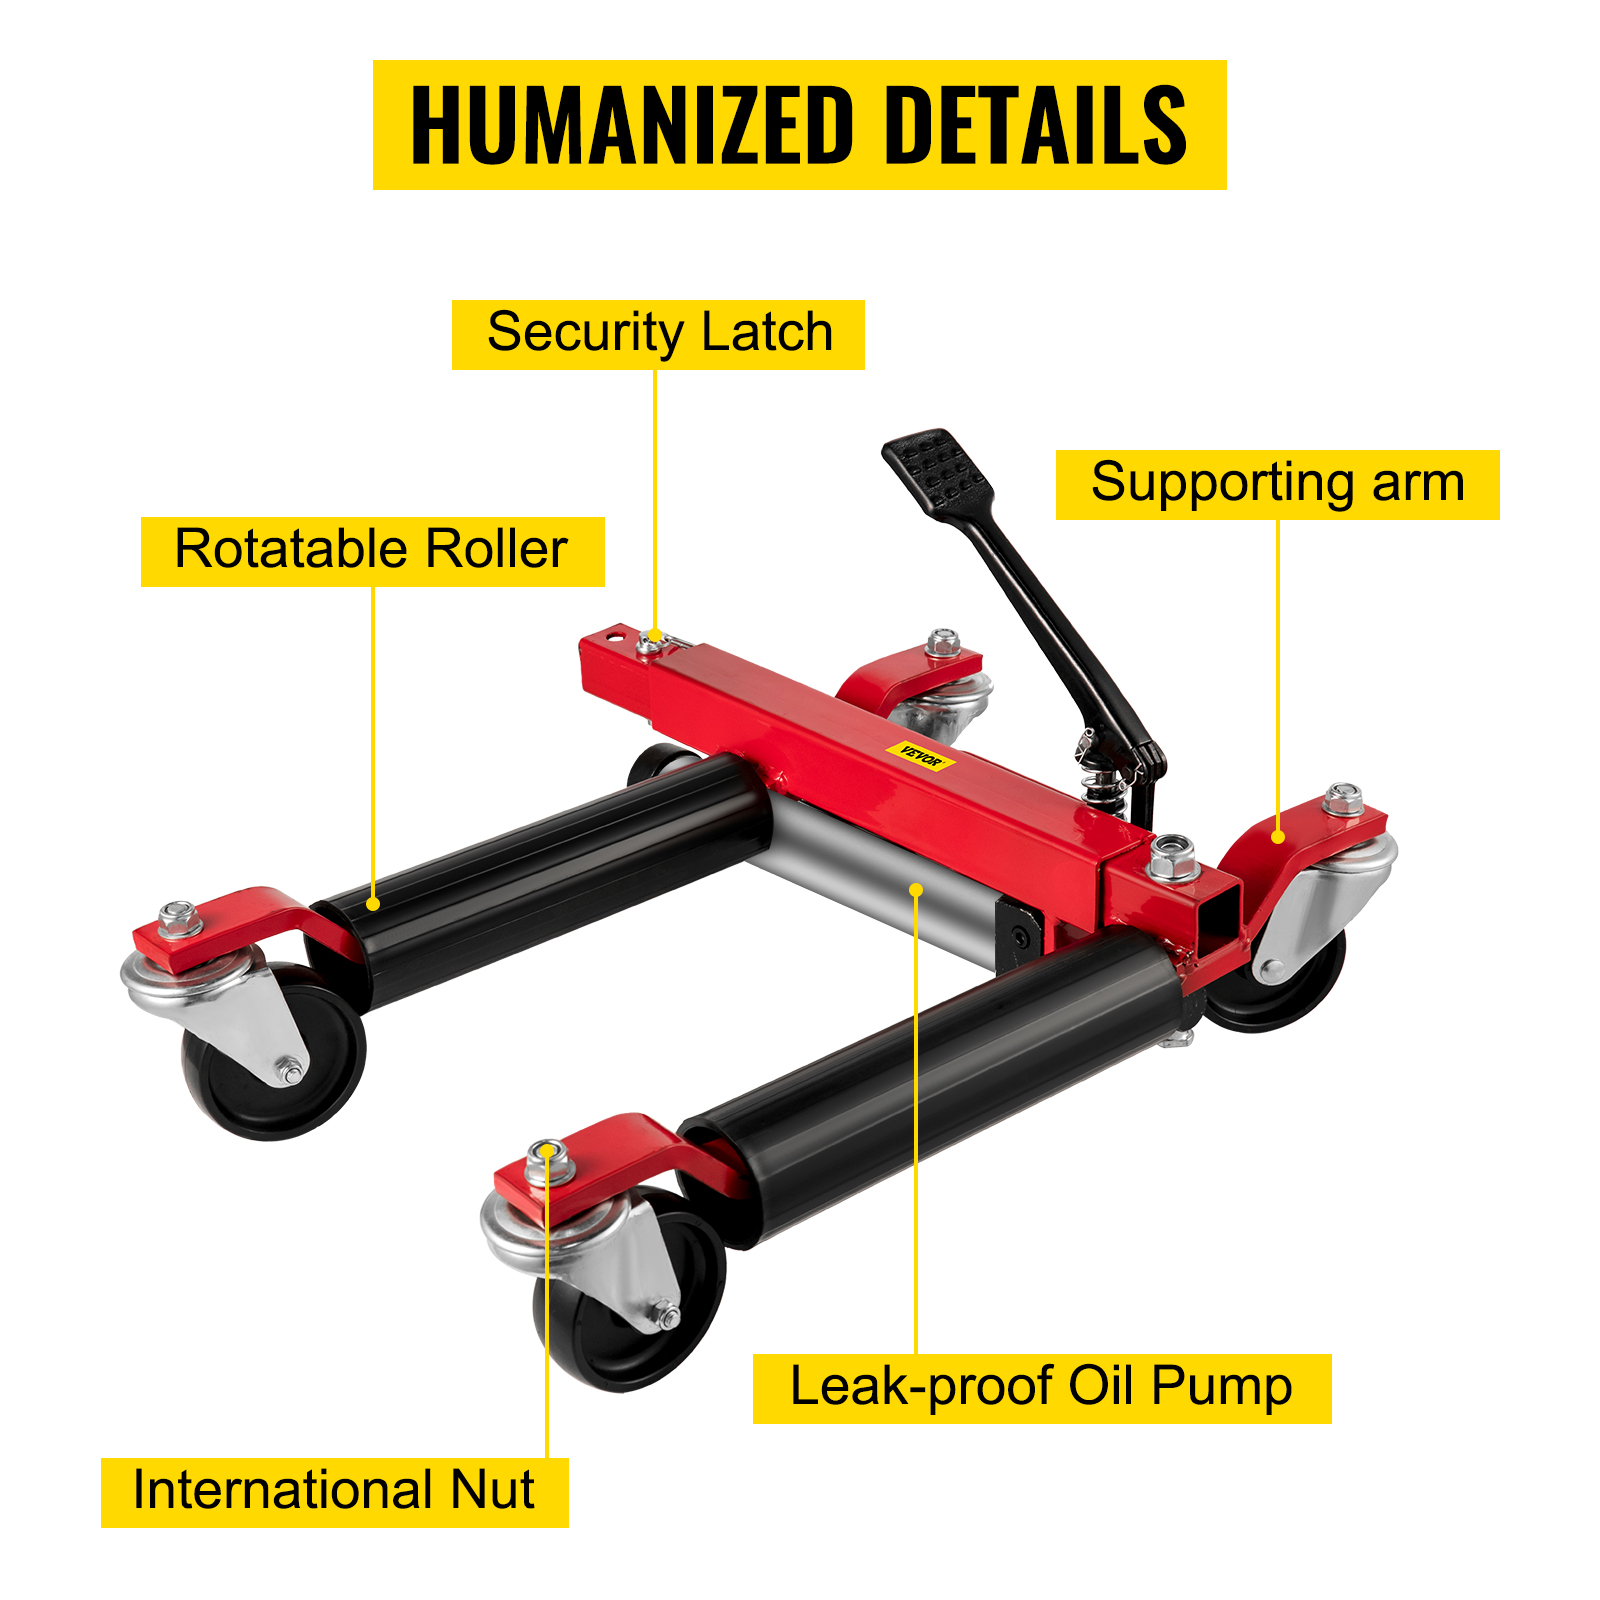 Tyre Width 12inches, 4 double-bearing universal casters Car Skate Vehicle Positioning Jack Foot Pump Hydraulic Tyre Lift Roller Dolly Hoist VEVOR Hydraulic Wheel Dolly 1500 lbs / 680 kg*2 pcs Car 